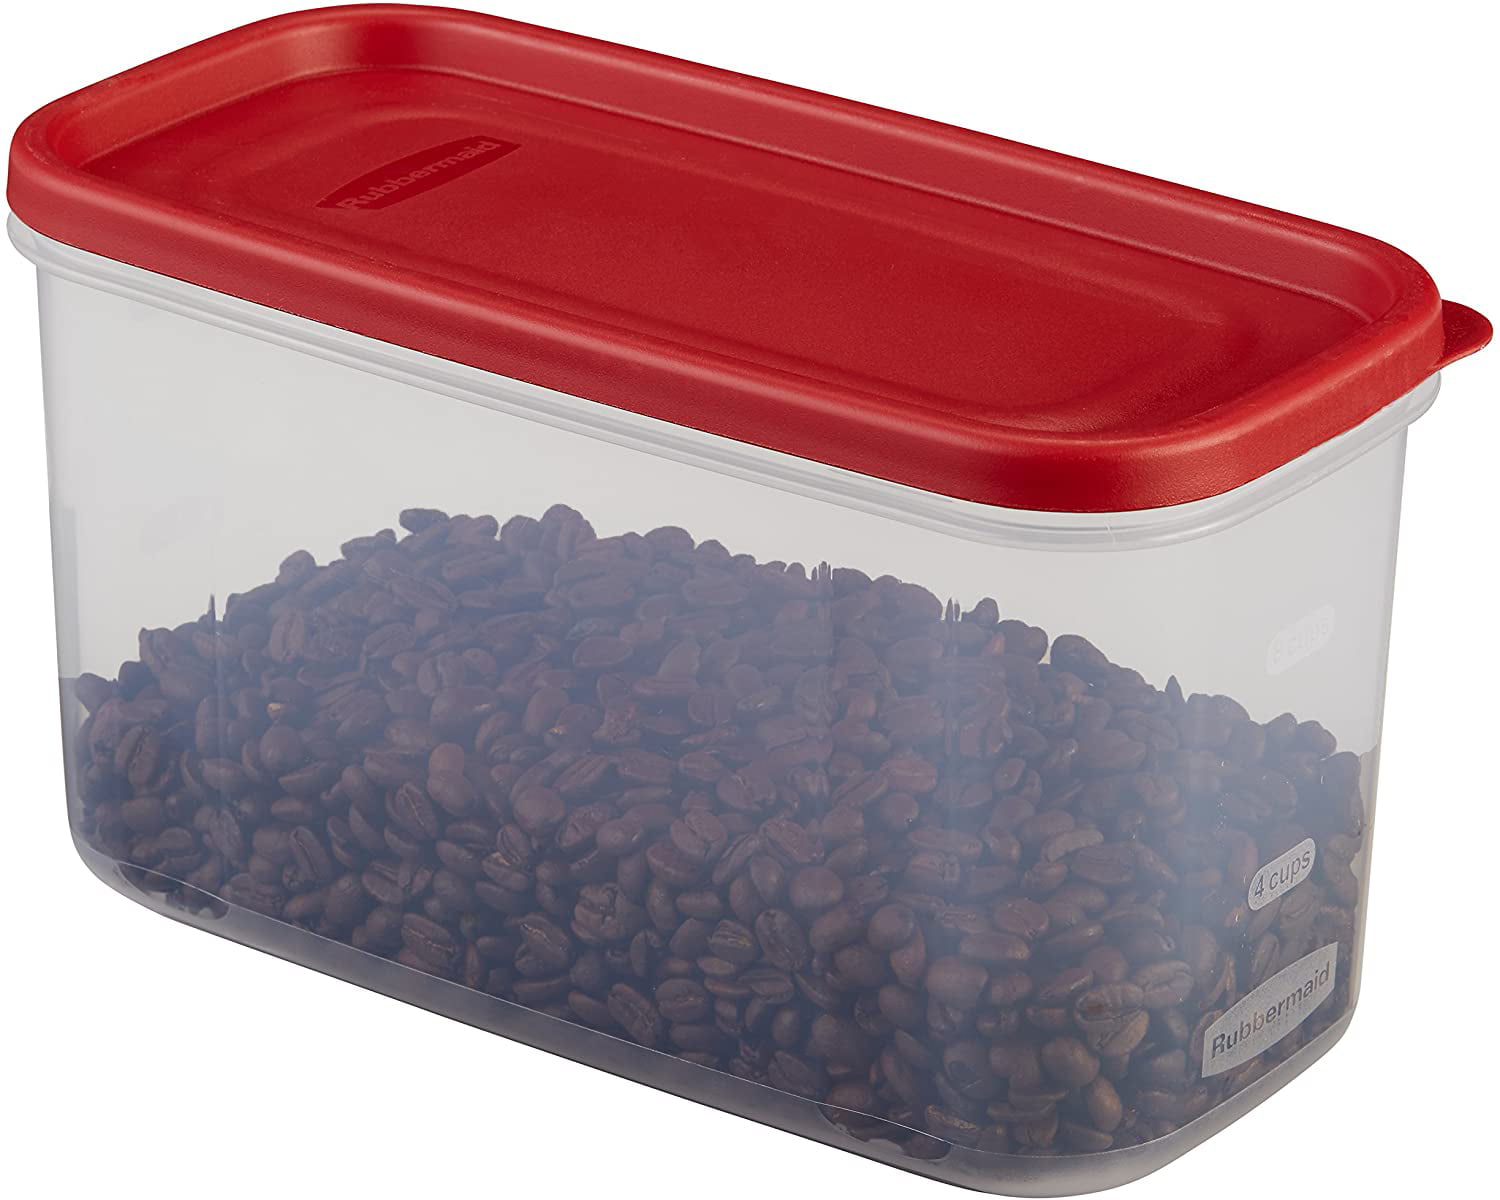 ea Rubbermaid 1776470 Racer Red 5 Cup Dry Food Plastic Storage Containers 8 